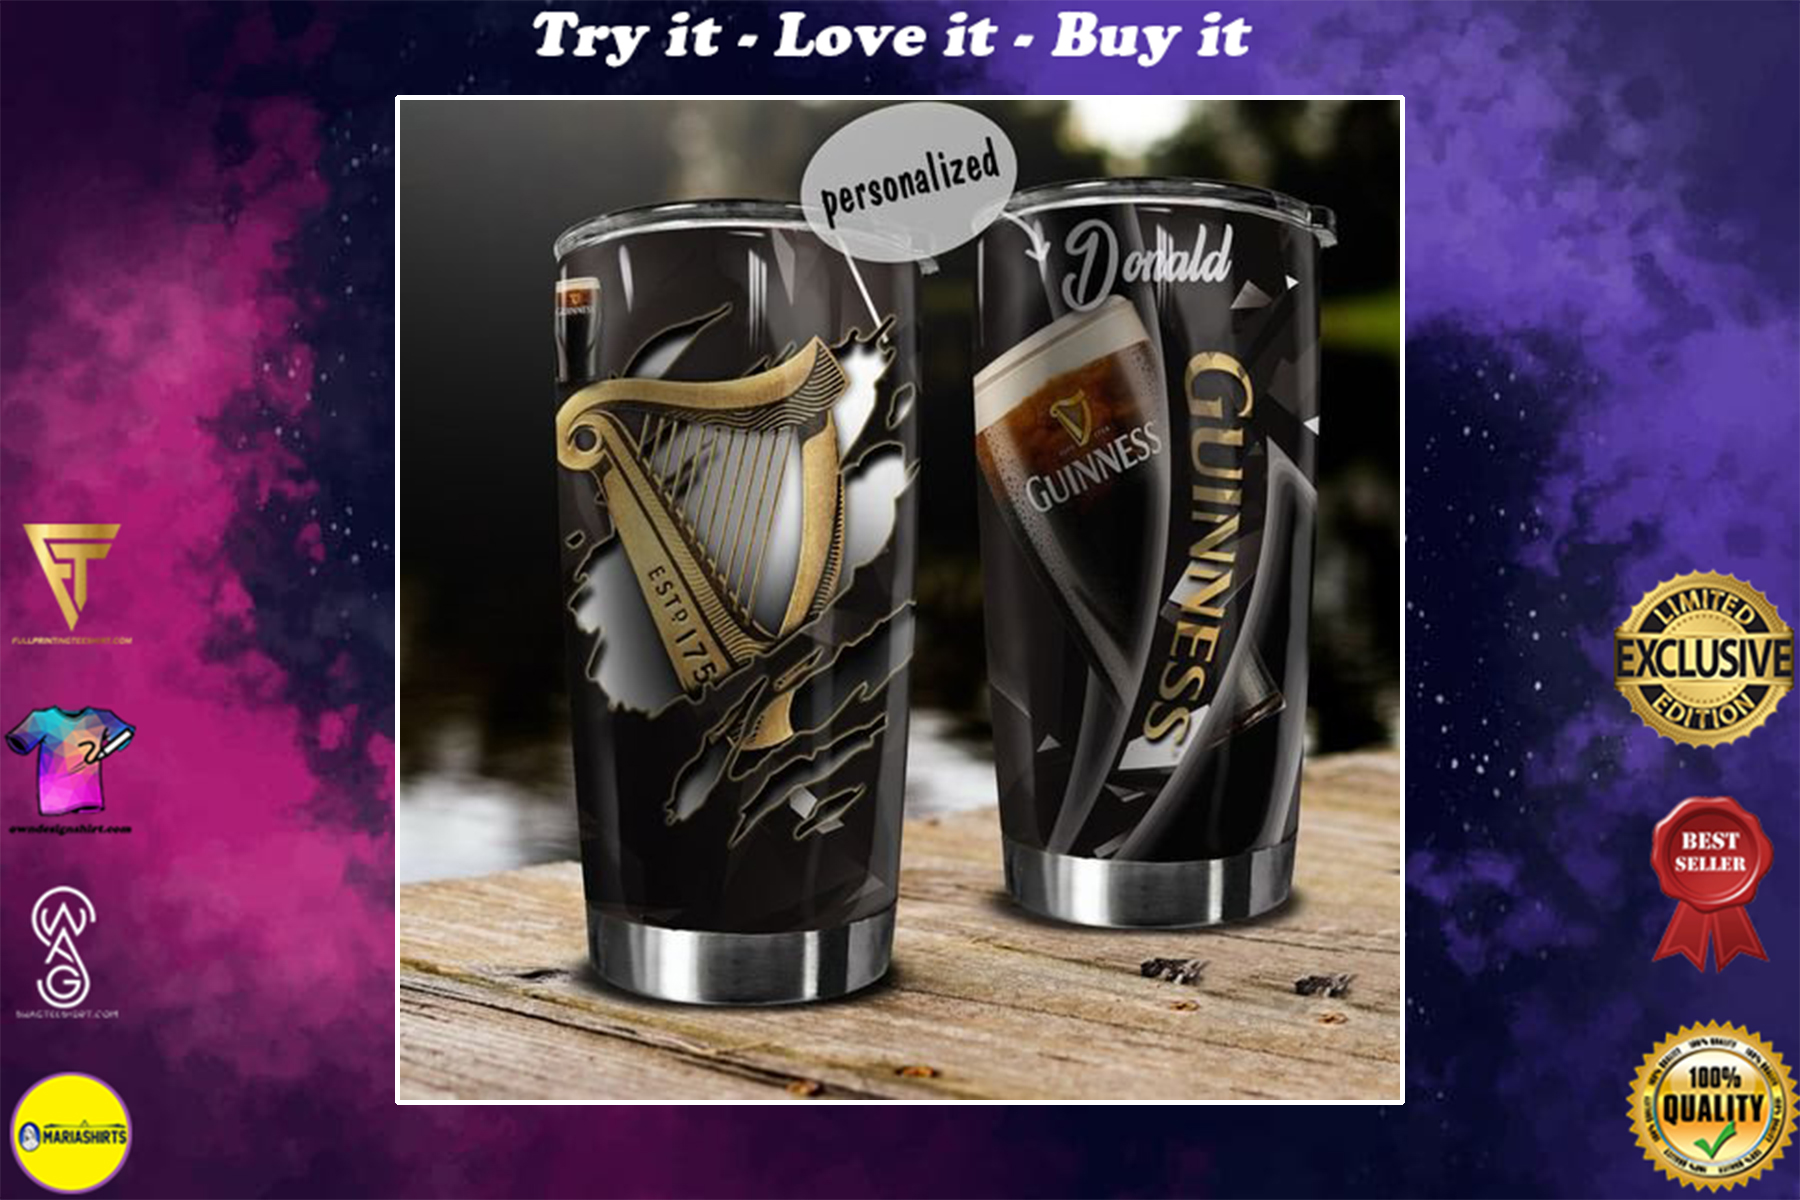 personalized name guinness beer tumbler